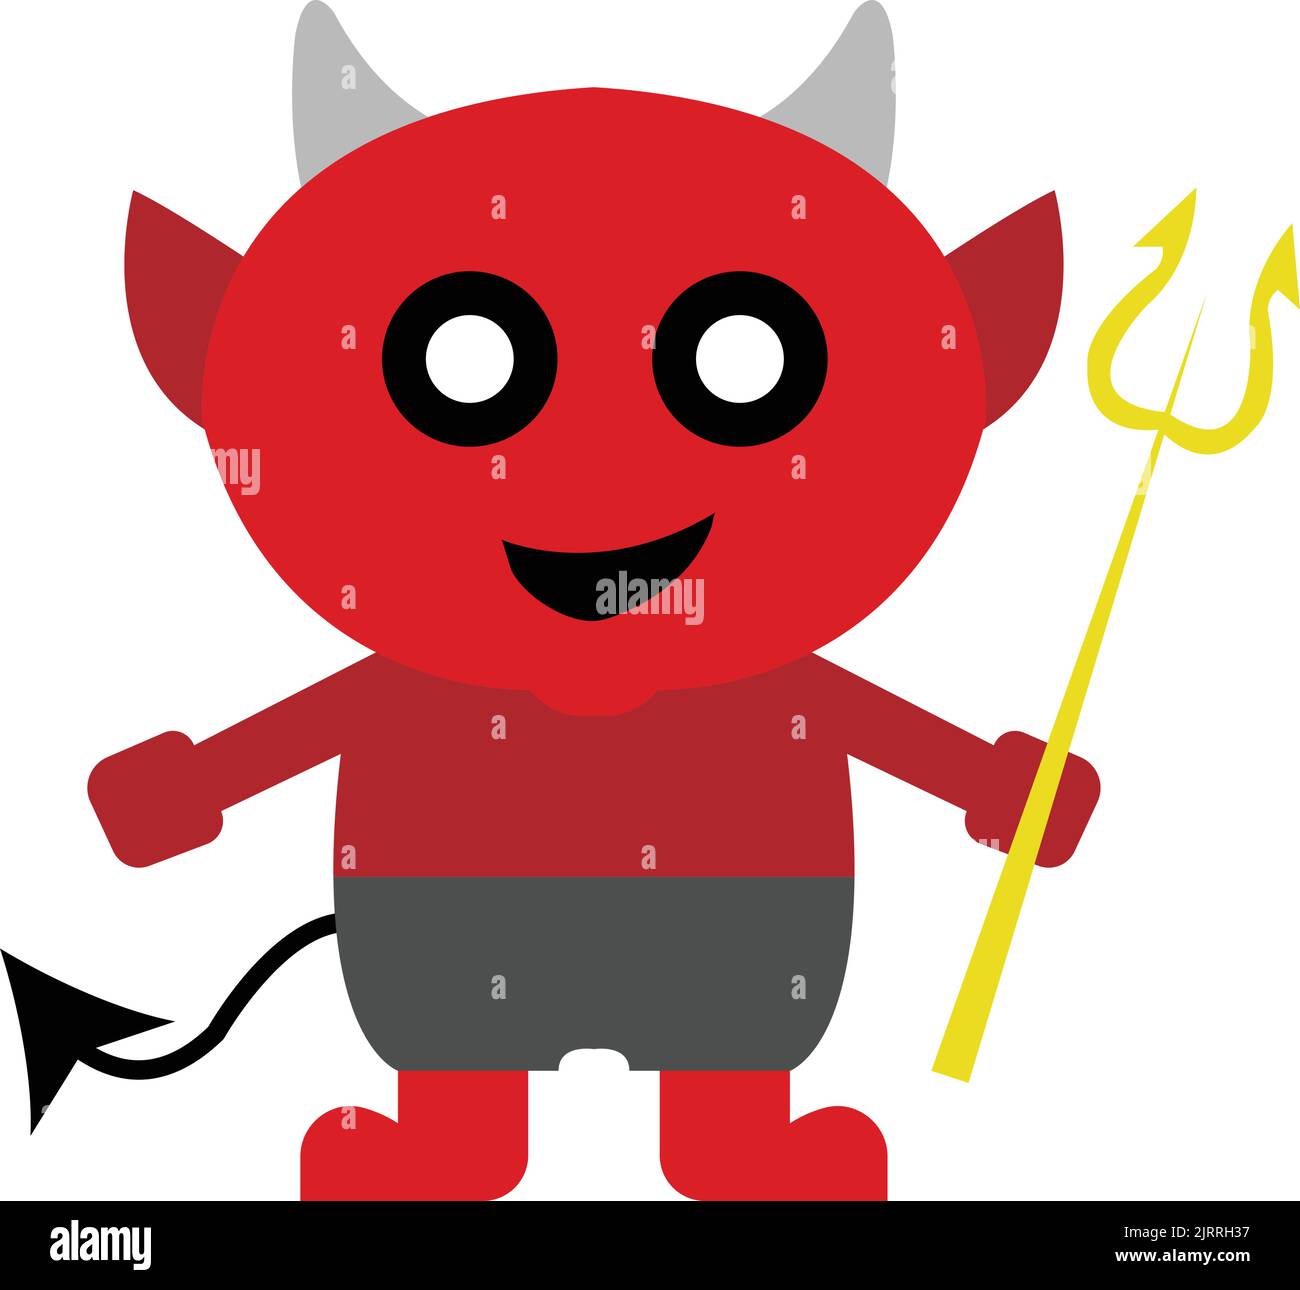 A red devil icon with gray horns, black tail, and yellow wand on the white background Stock Vector